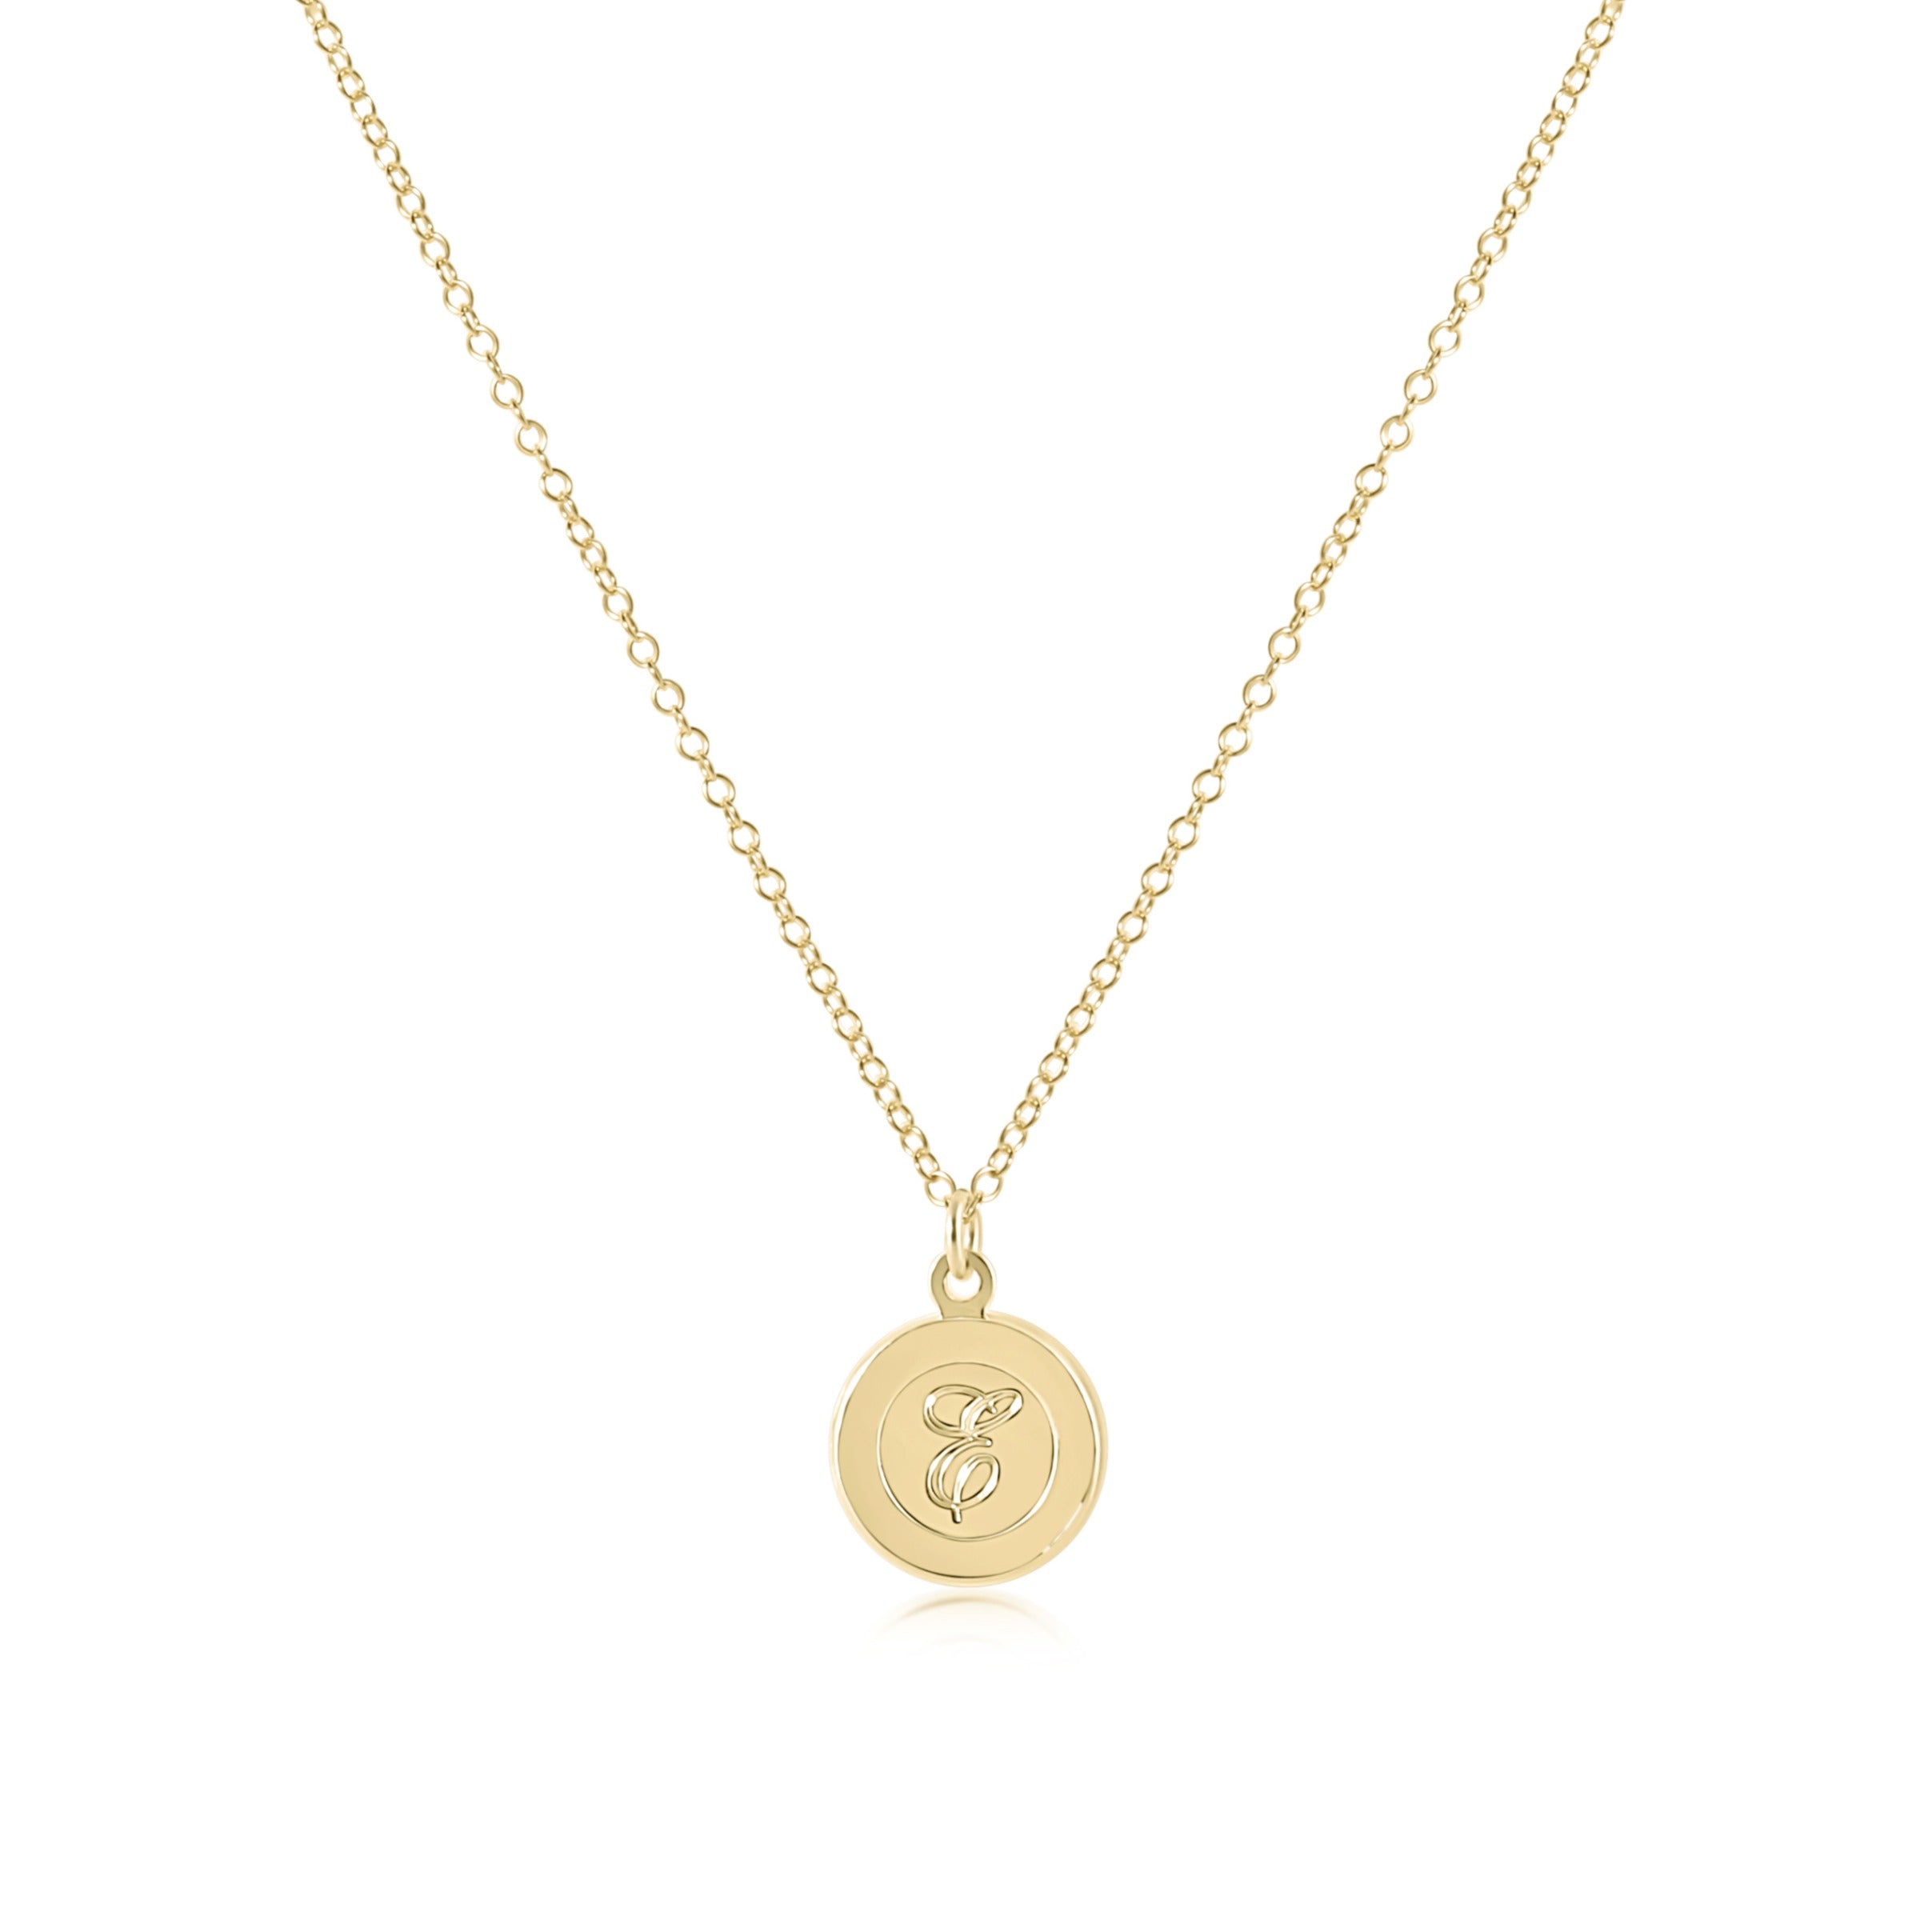 Respect Gold Disc Initial Necklace, 16"